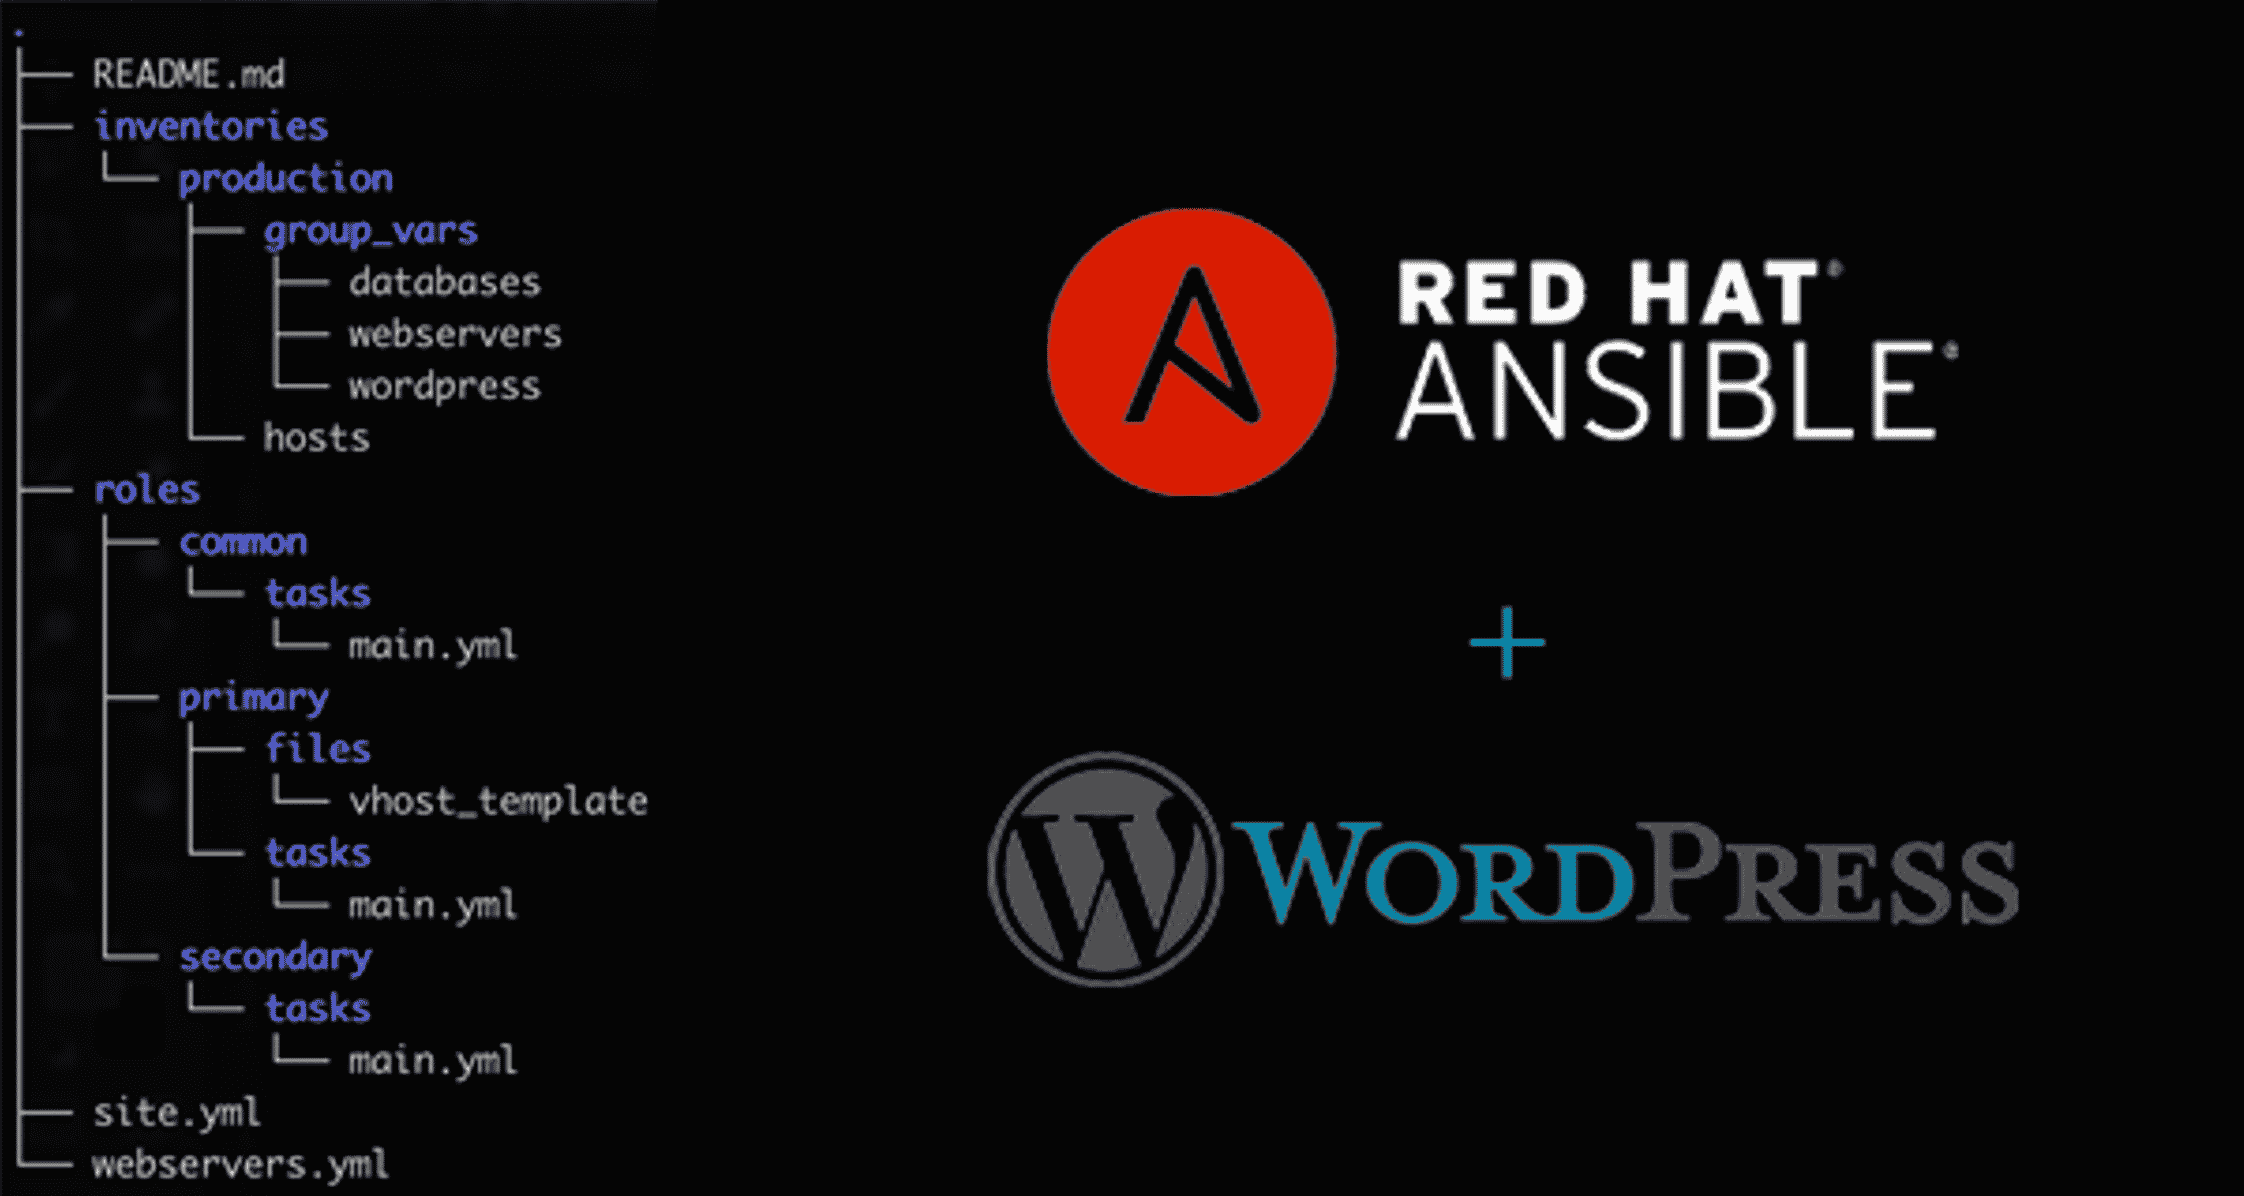 Ansible is an open-source product of Red Hat